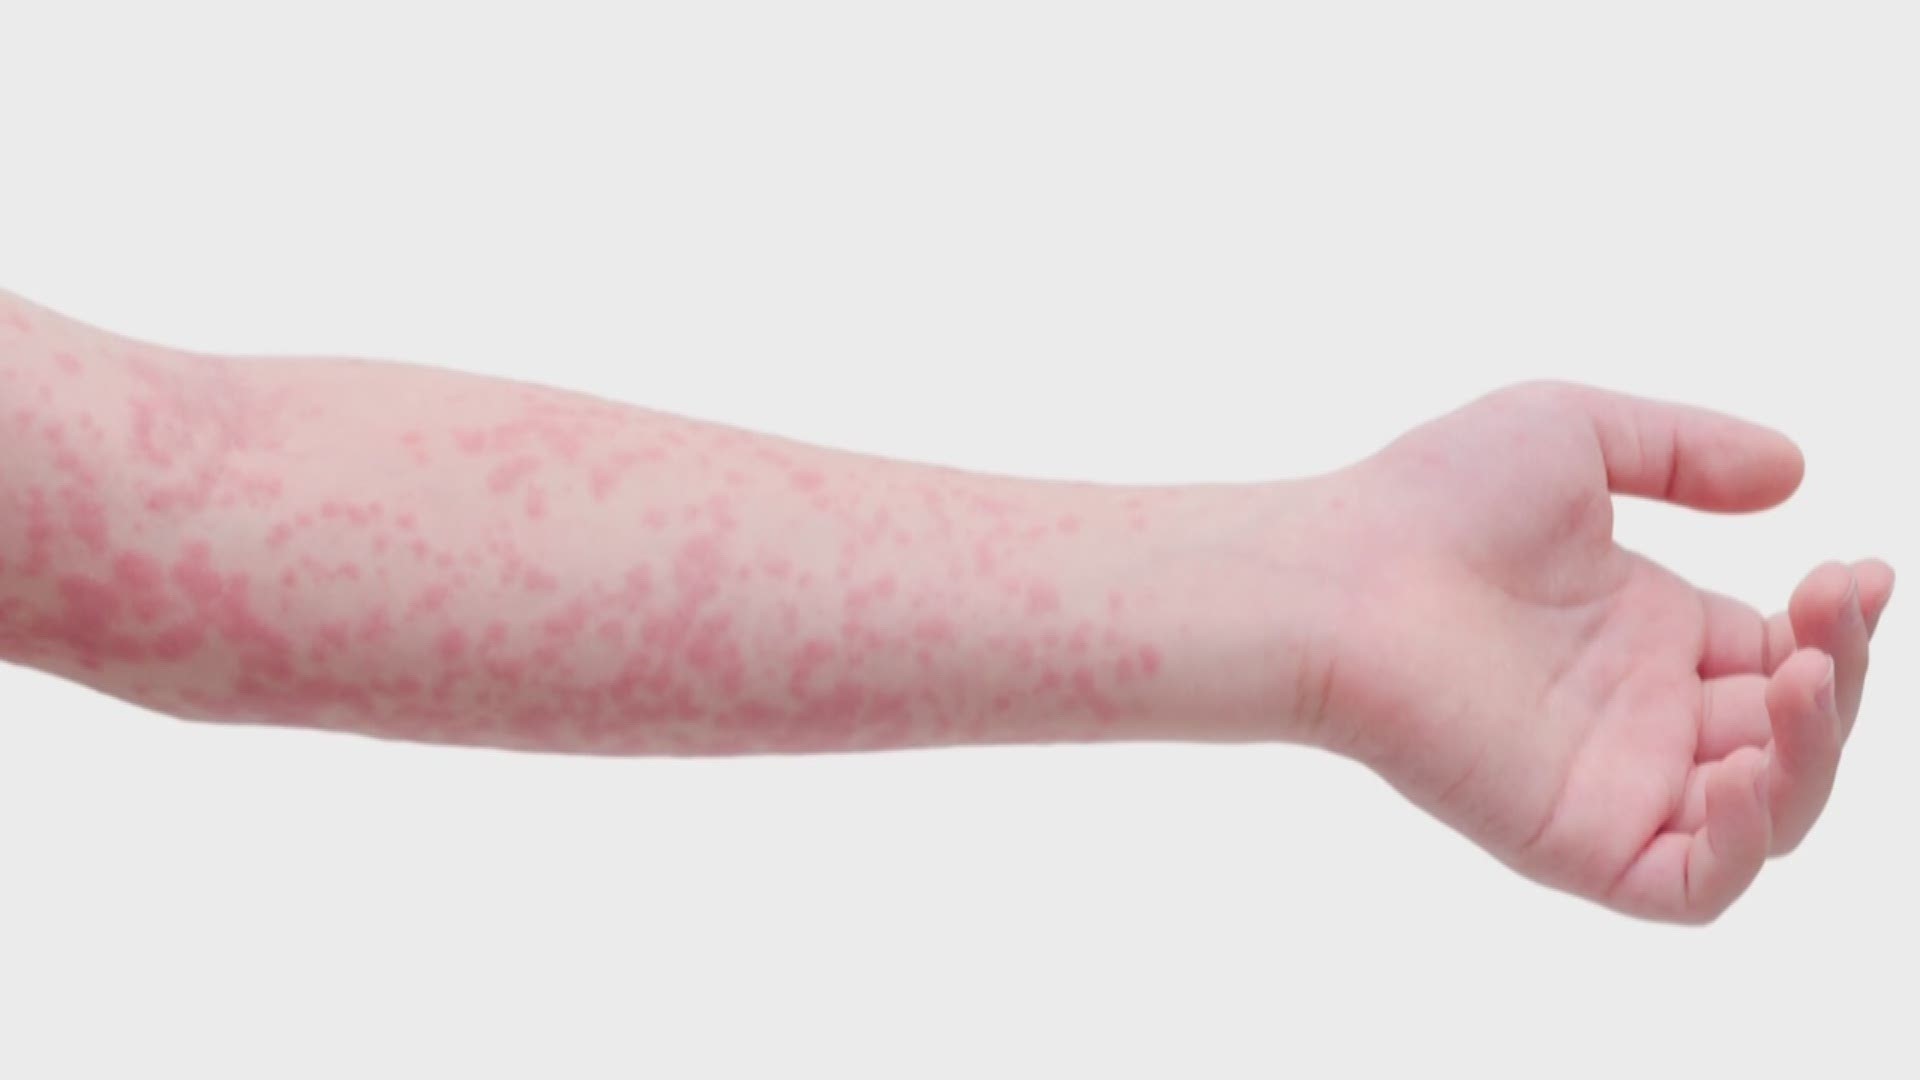 Health officials said East Tennessee now has one confirmed case of measles, which might not seem like a big issue until you learn how incredibly contagious the disease is.